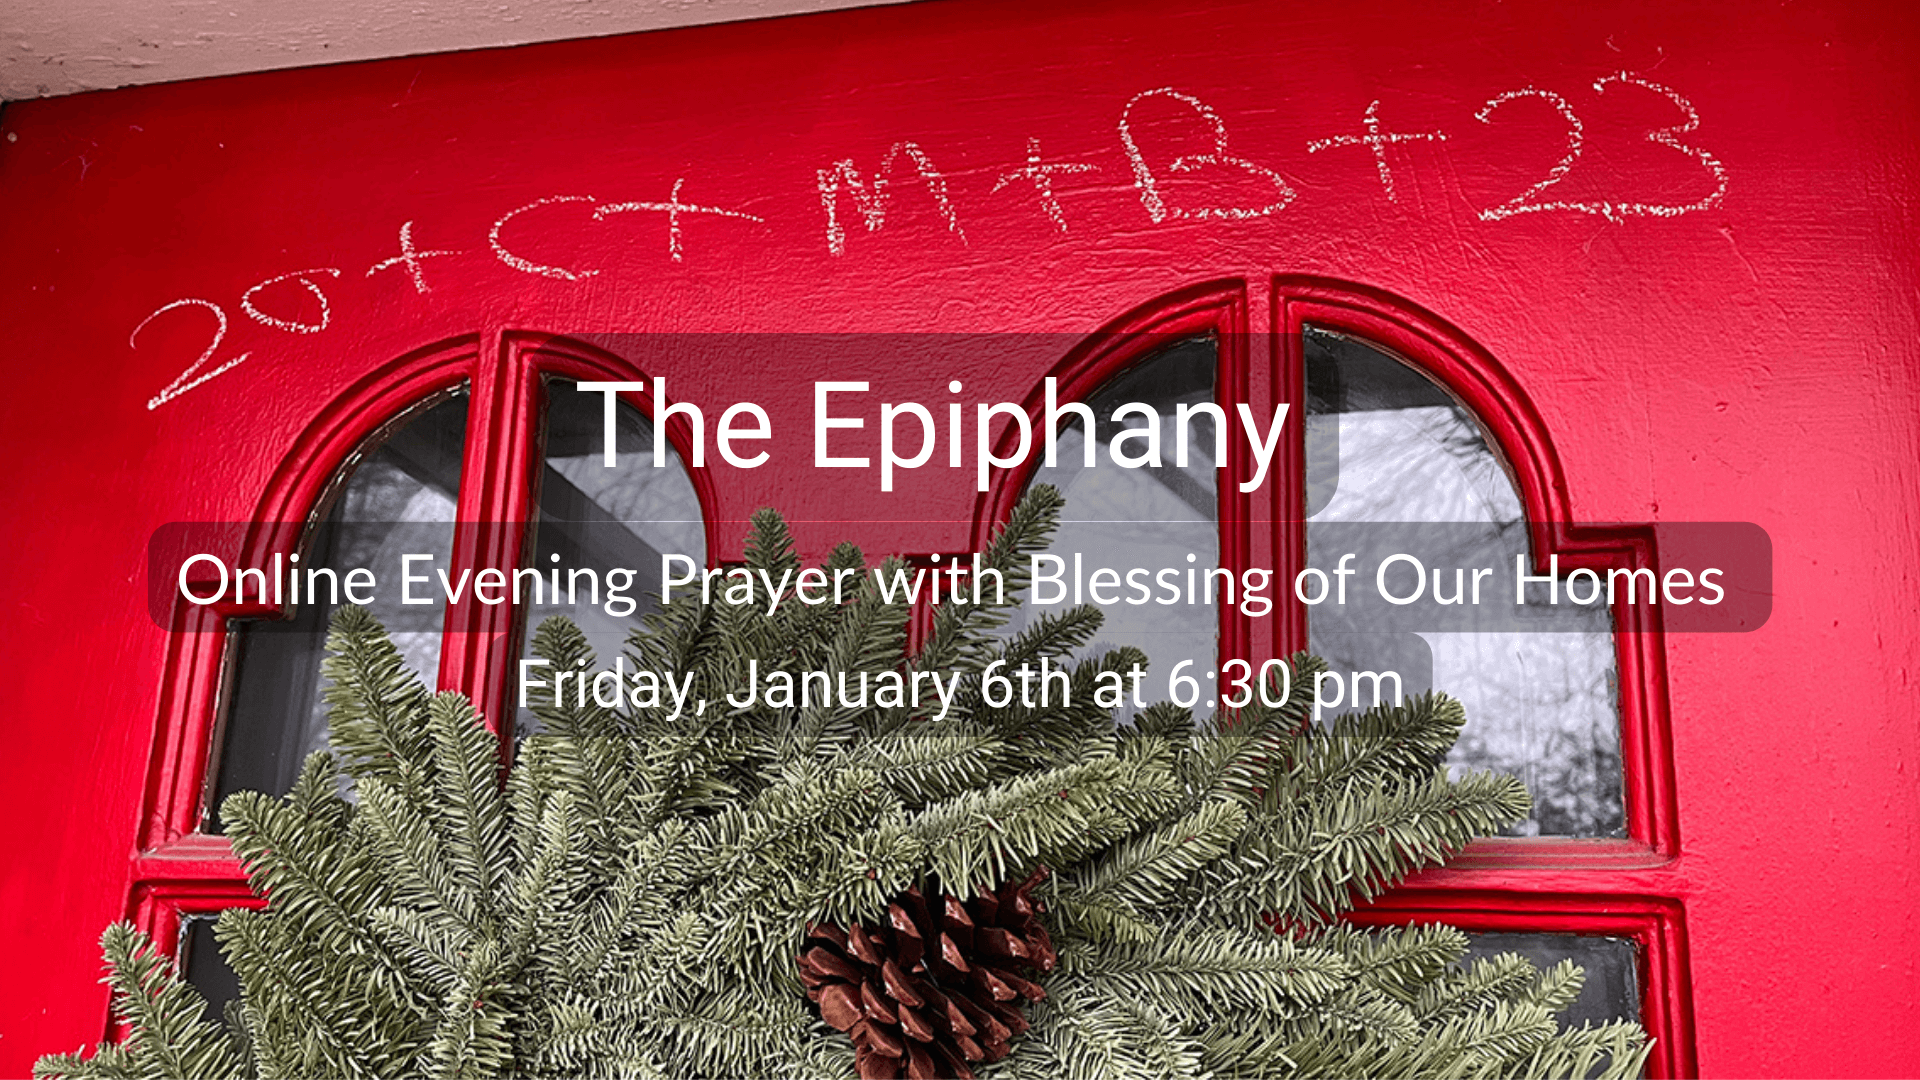 The Epiphany Evening Prayer with Blessing of Our Homes Friday January 5th at 6:30 pm